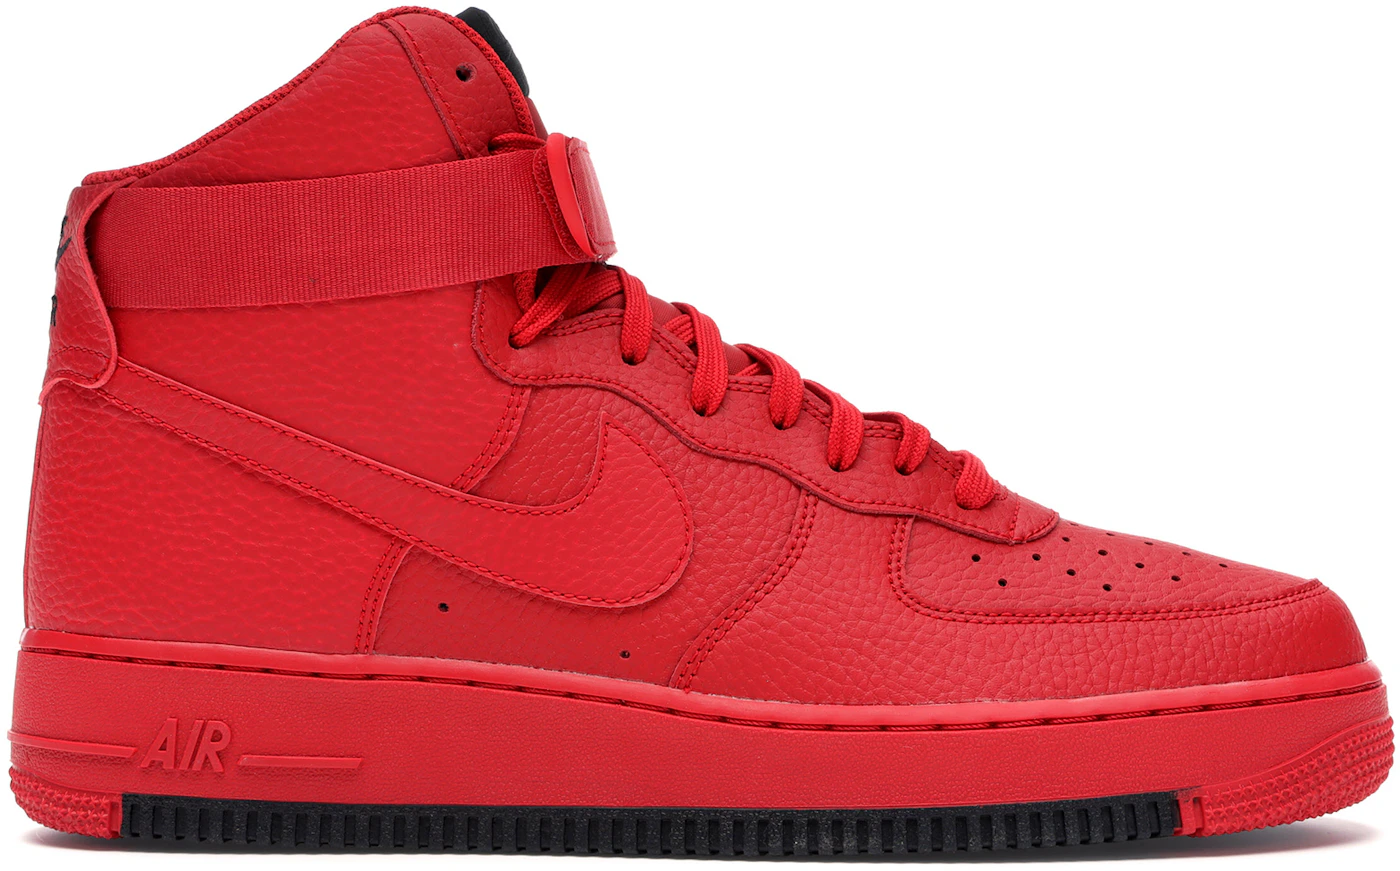 Nike Air Force 1 High University Red Hombre - AO2440-600 - MX